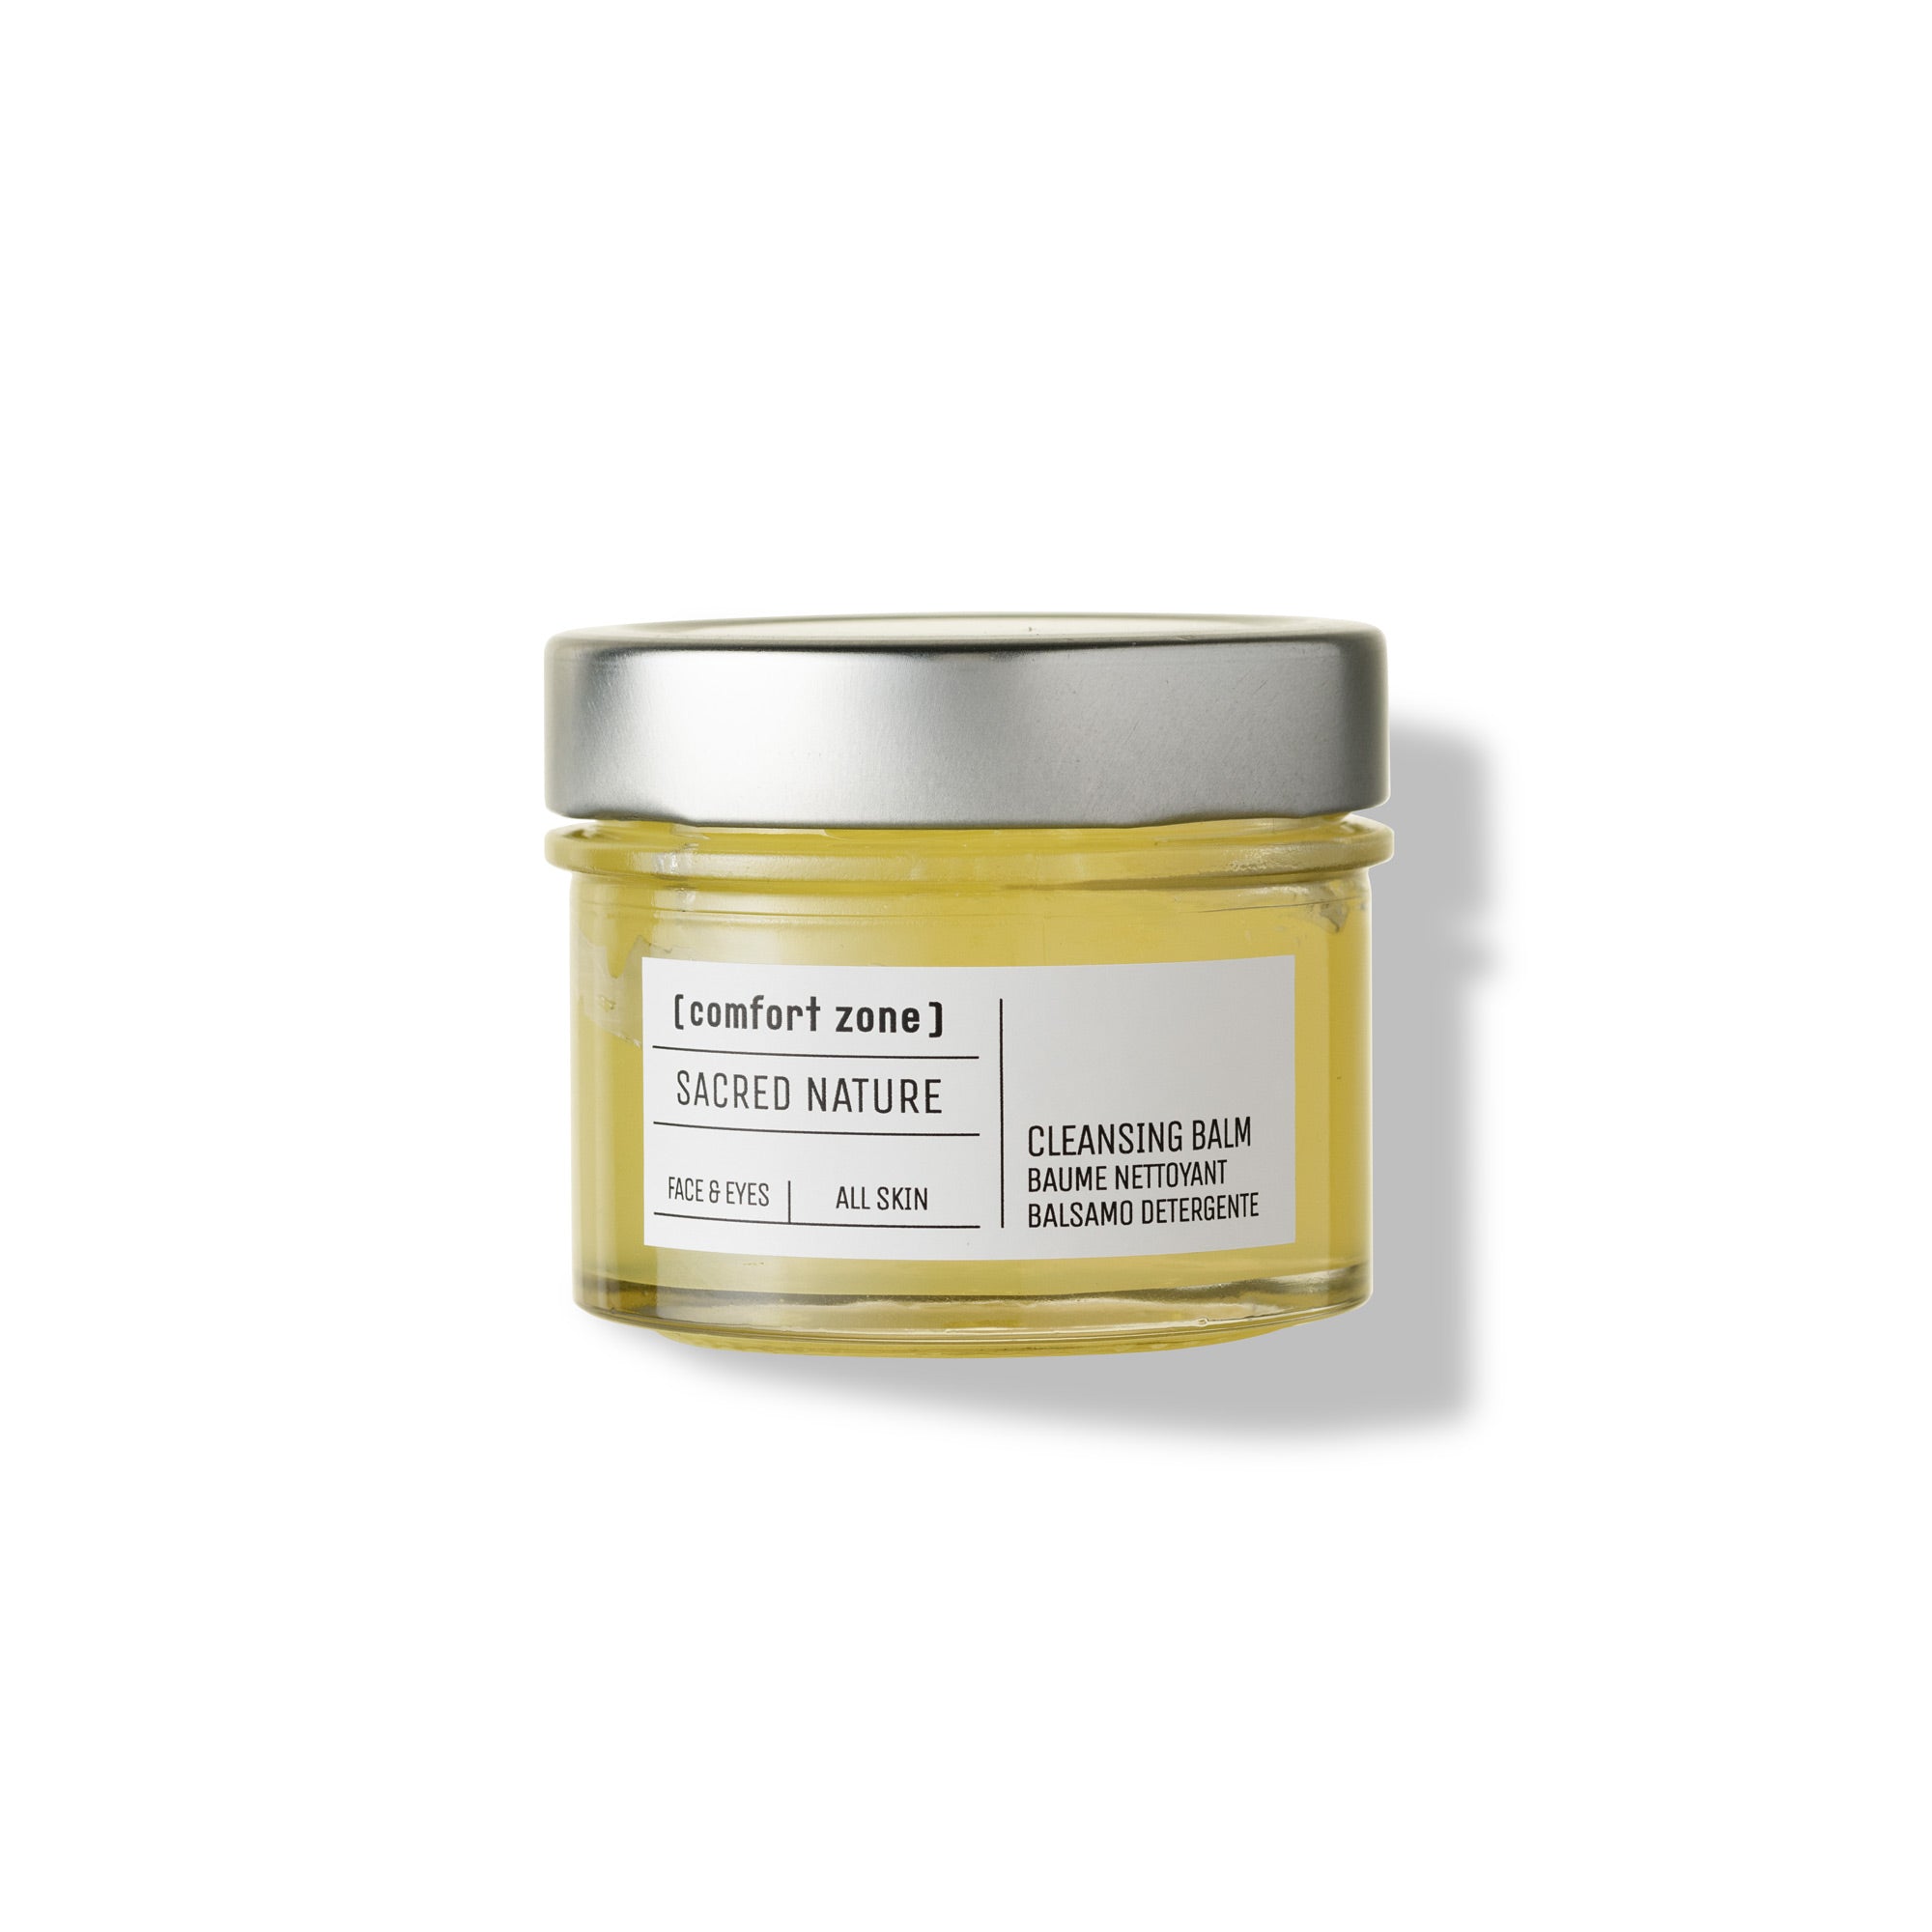 Comfort Zone: SACRED NATURE CLEANSING BALM Balsamo detergente-
